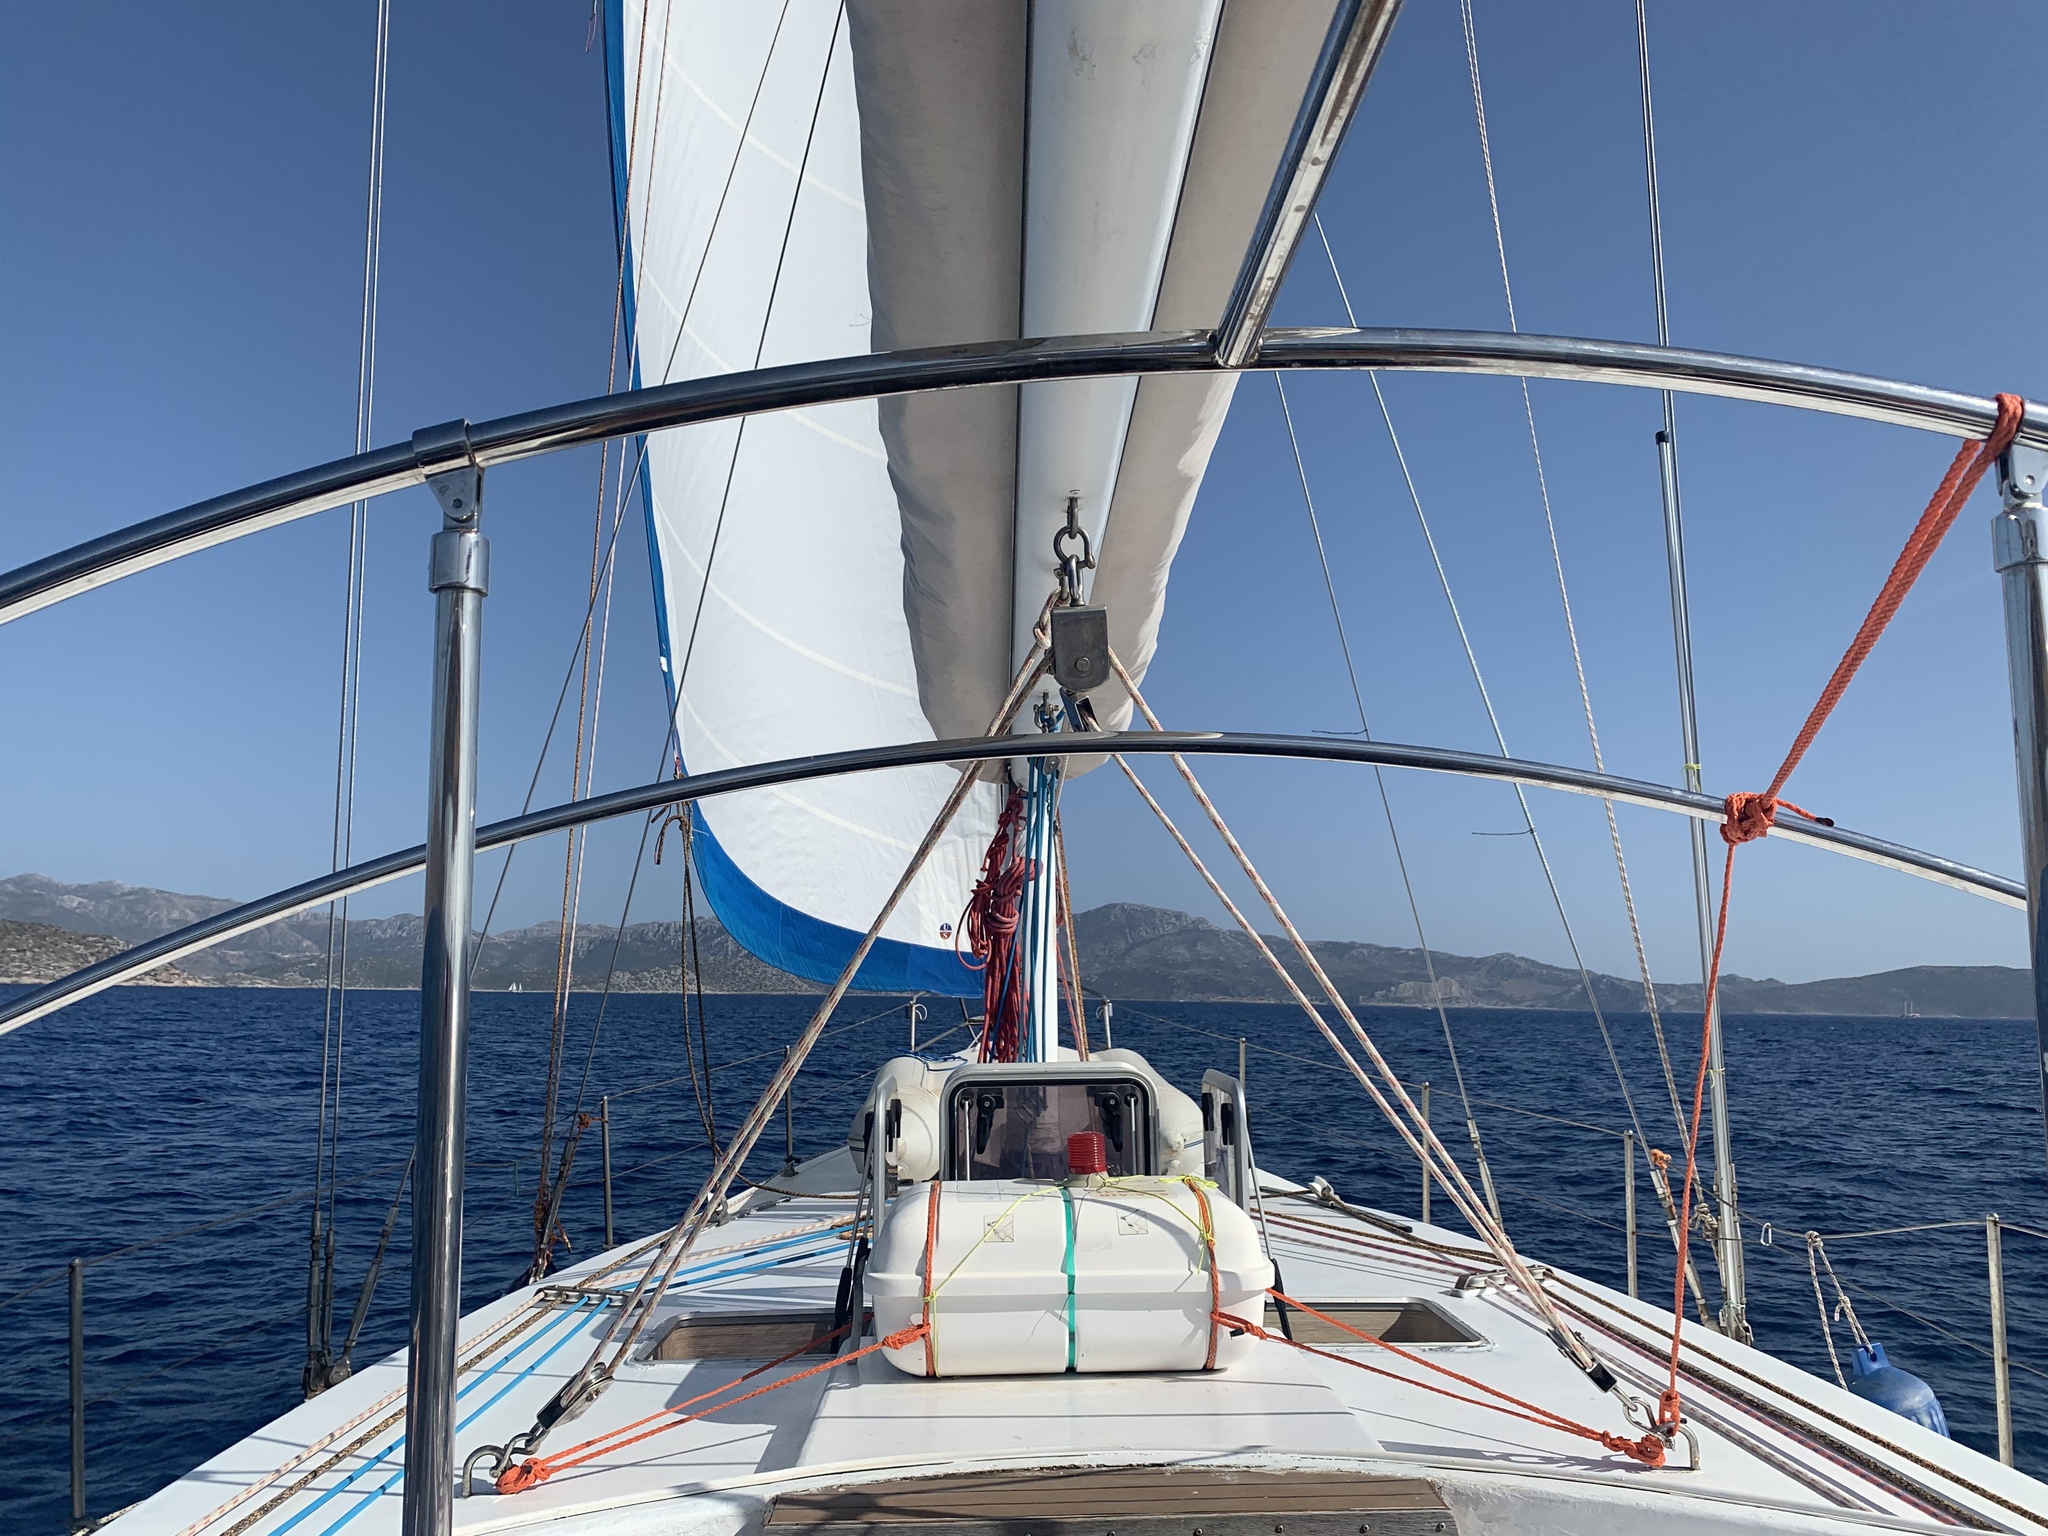 Yacht charter in the Mediterranean. Where did it take us - My, Drive, Life stories, Longpost, Yachting, Tourism, Greece, Personal experience, Sea, Extreme, , Yacht, Positive, Picture with text, Video